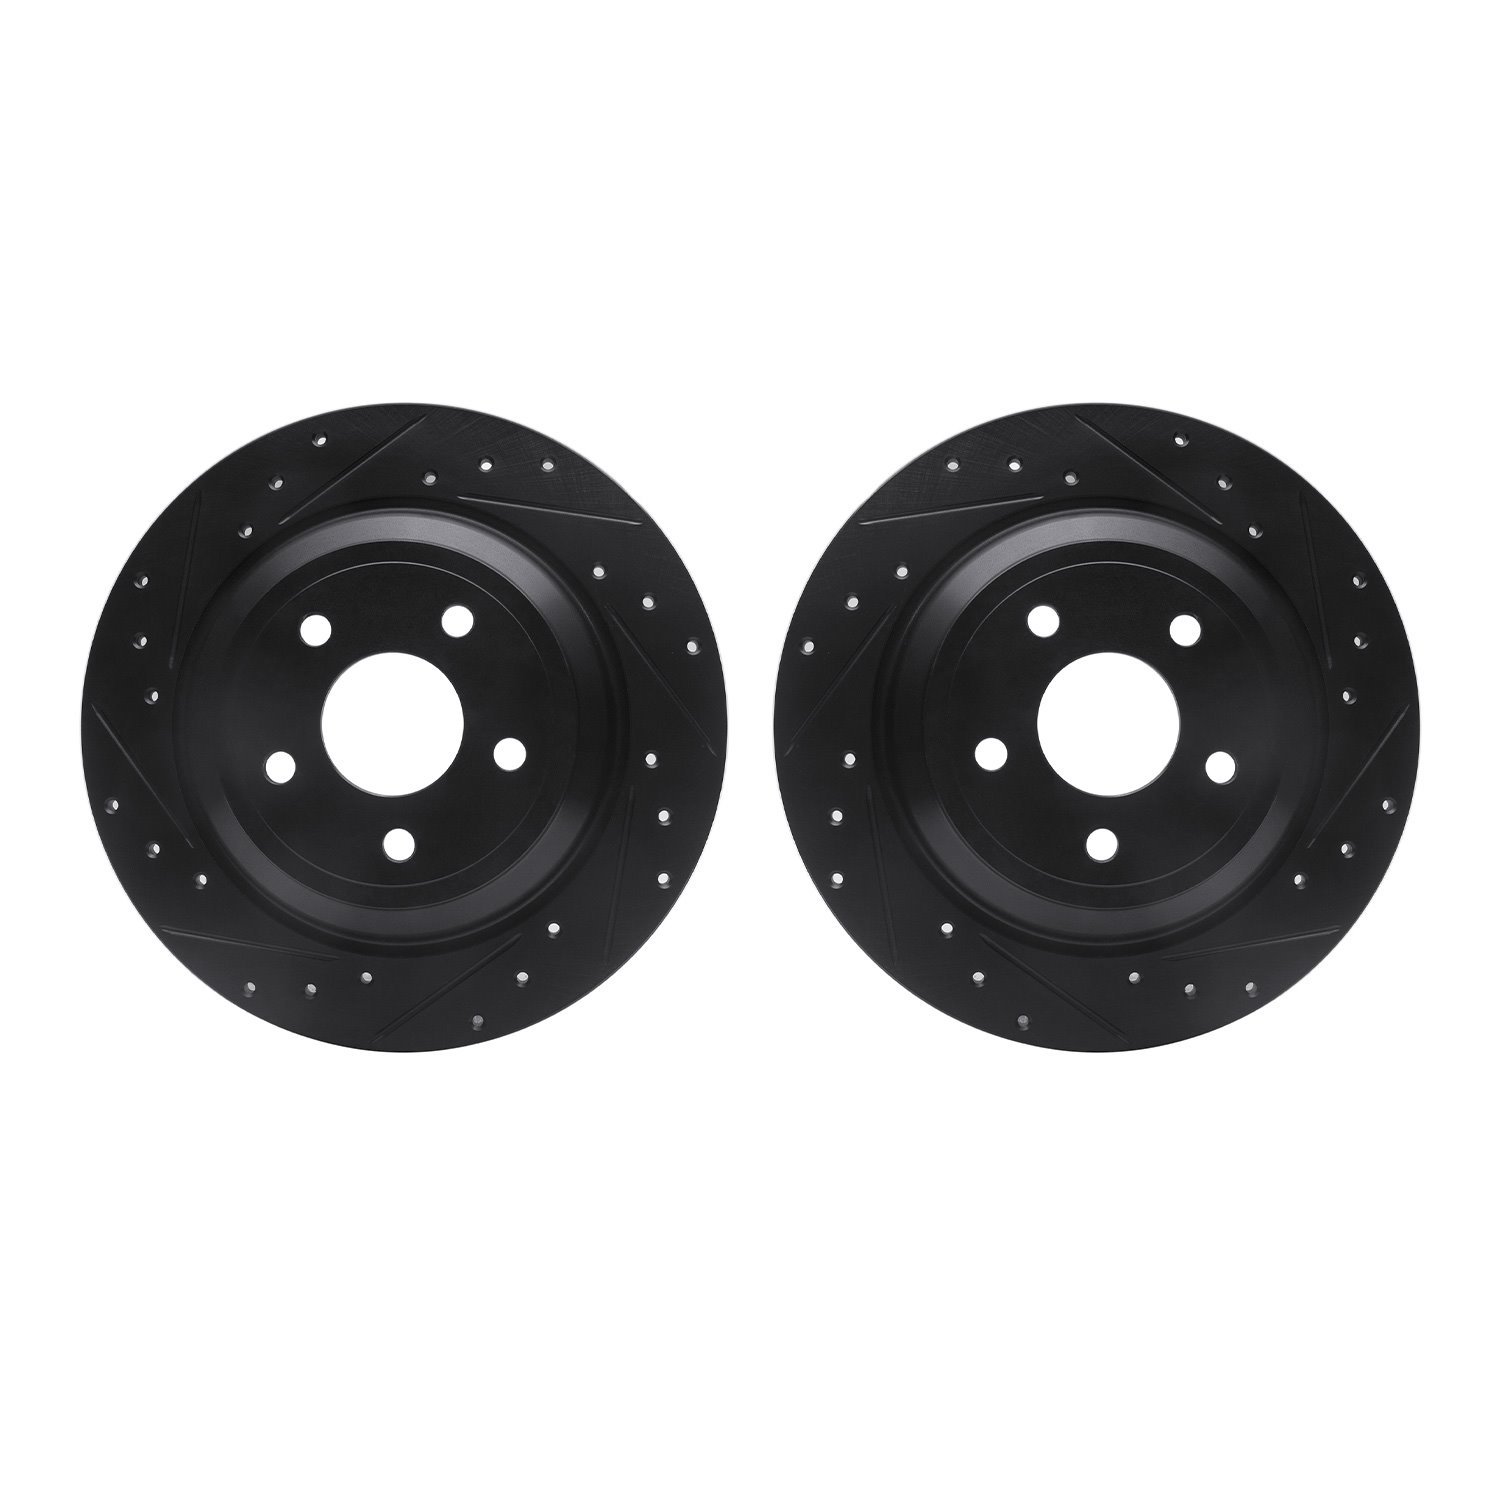 8002-54230 Drilled/Slotted Brake Rotors [Black], Fits Select Ford/Lincoln/Mercury/Mazda, Position: Rear